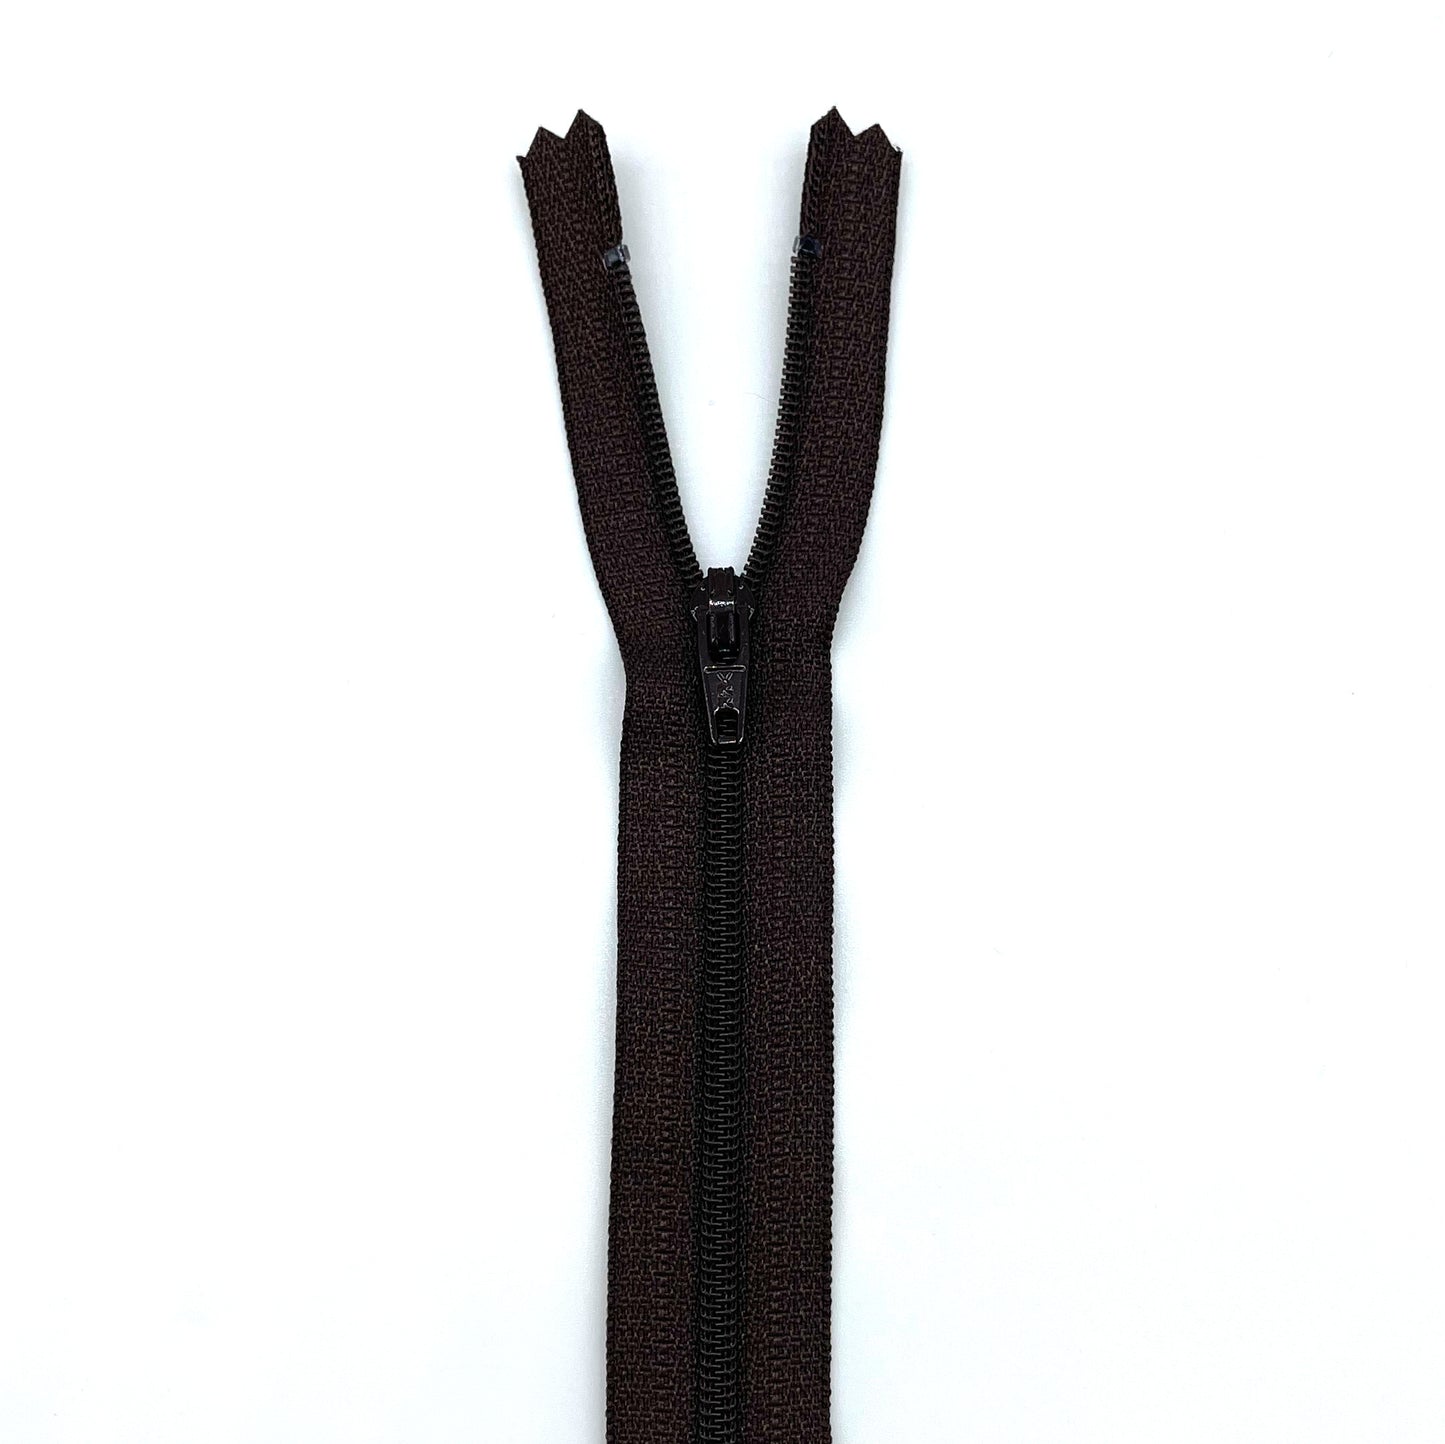 Dress Zippers (up to 56cm/22")